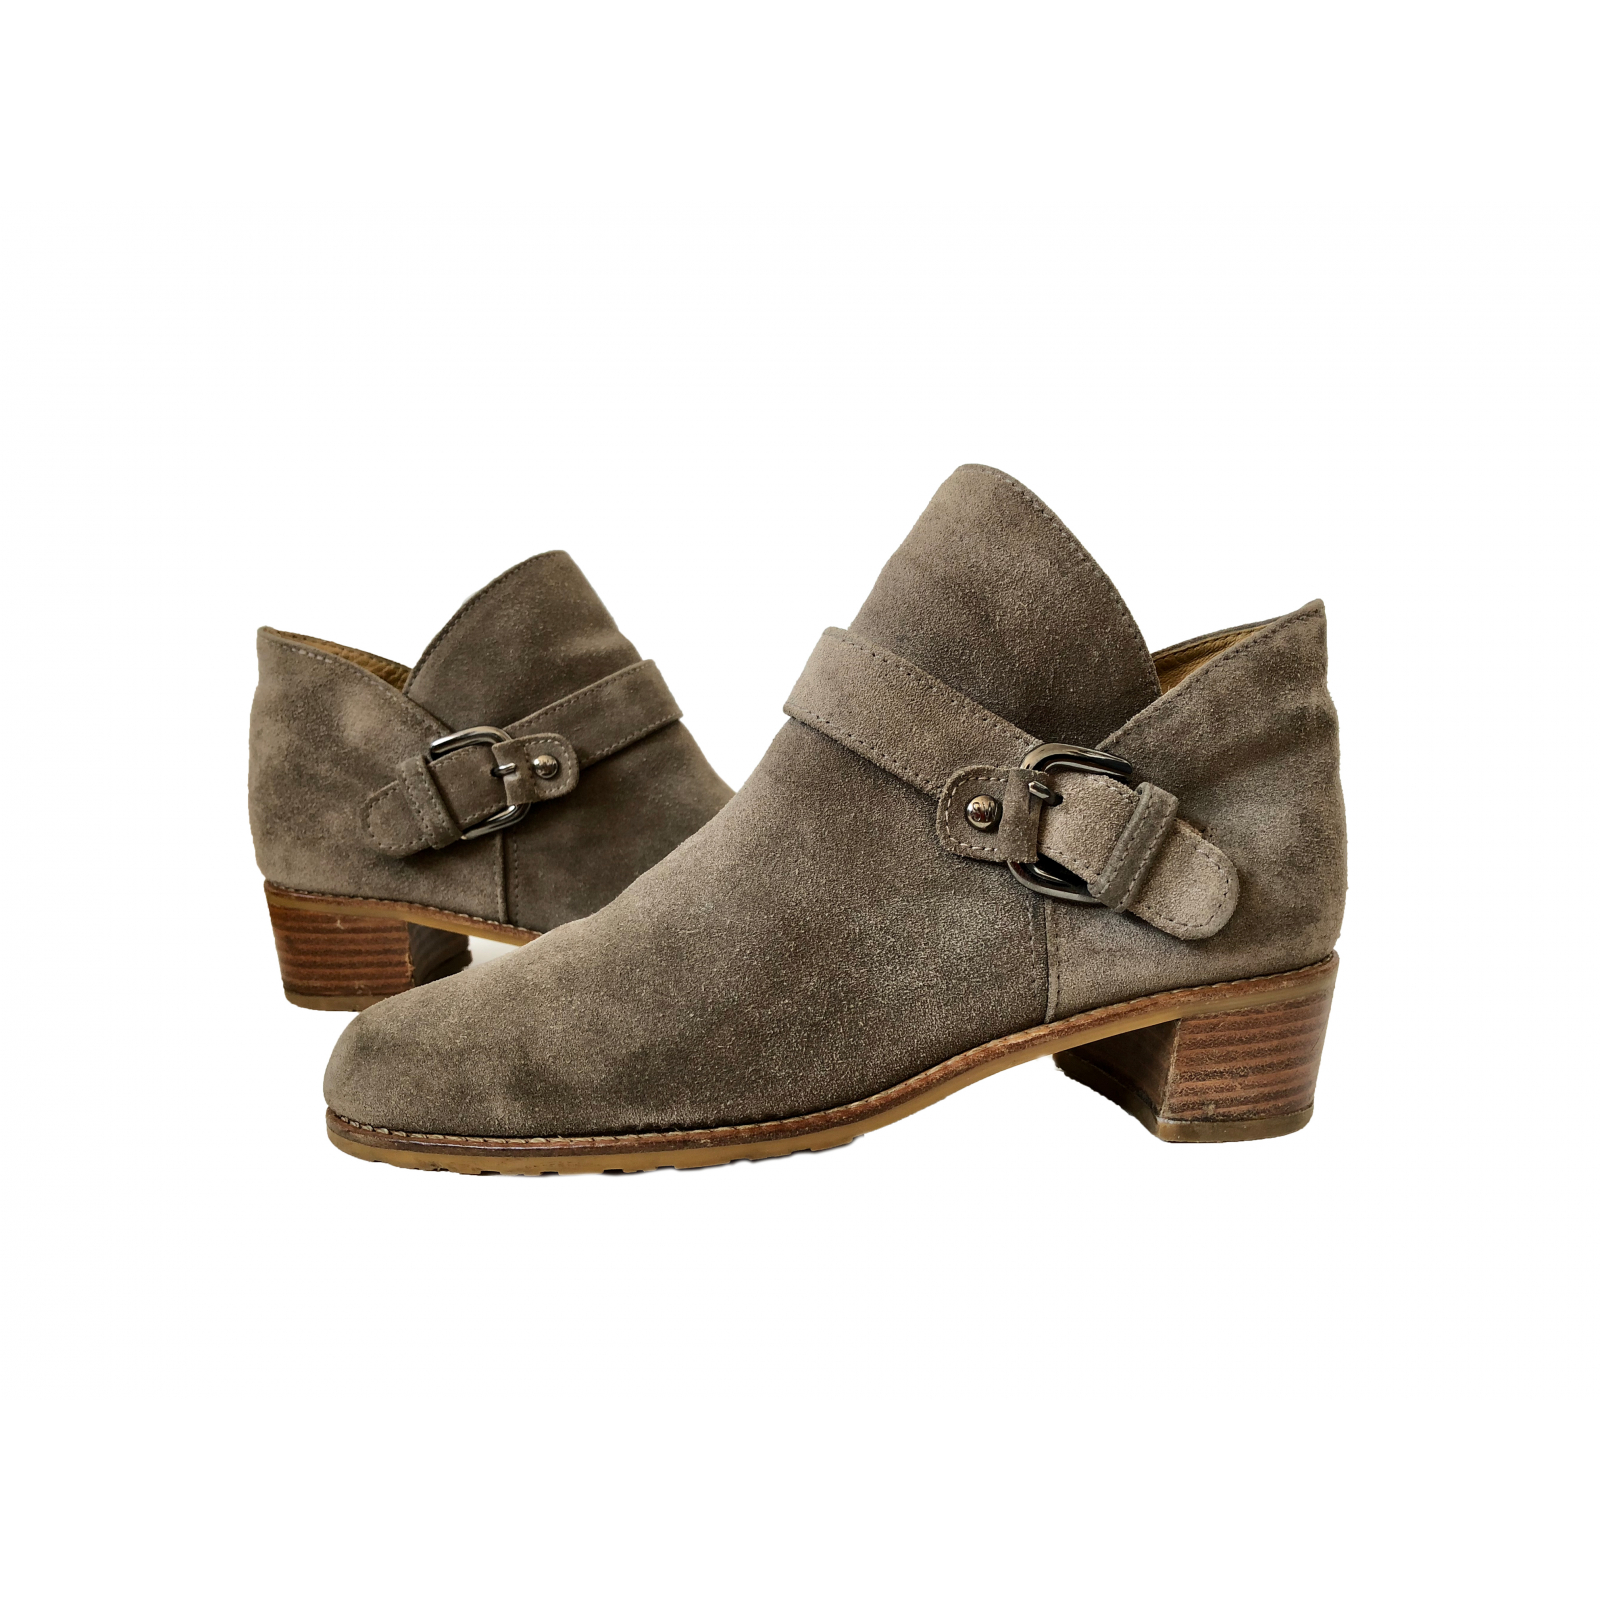 STUART WEITZMAN DUDE Taupe Suede Buckled Ankle